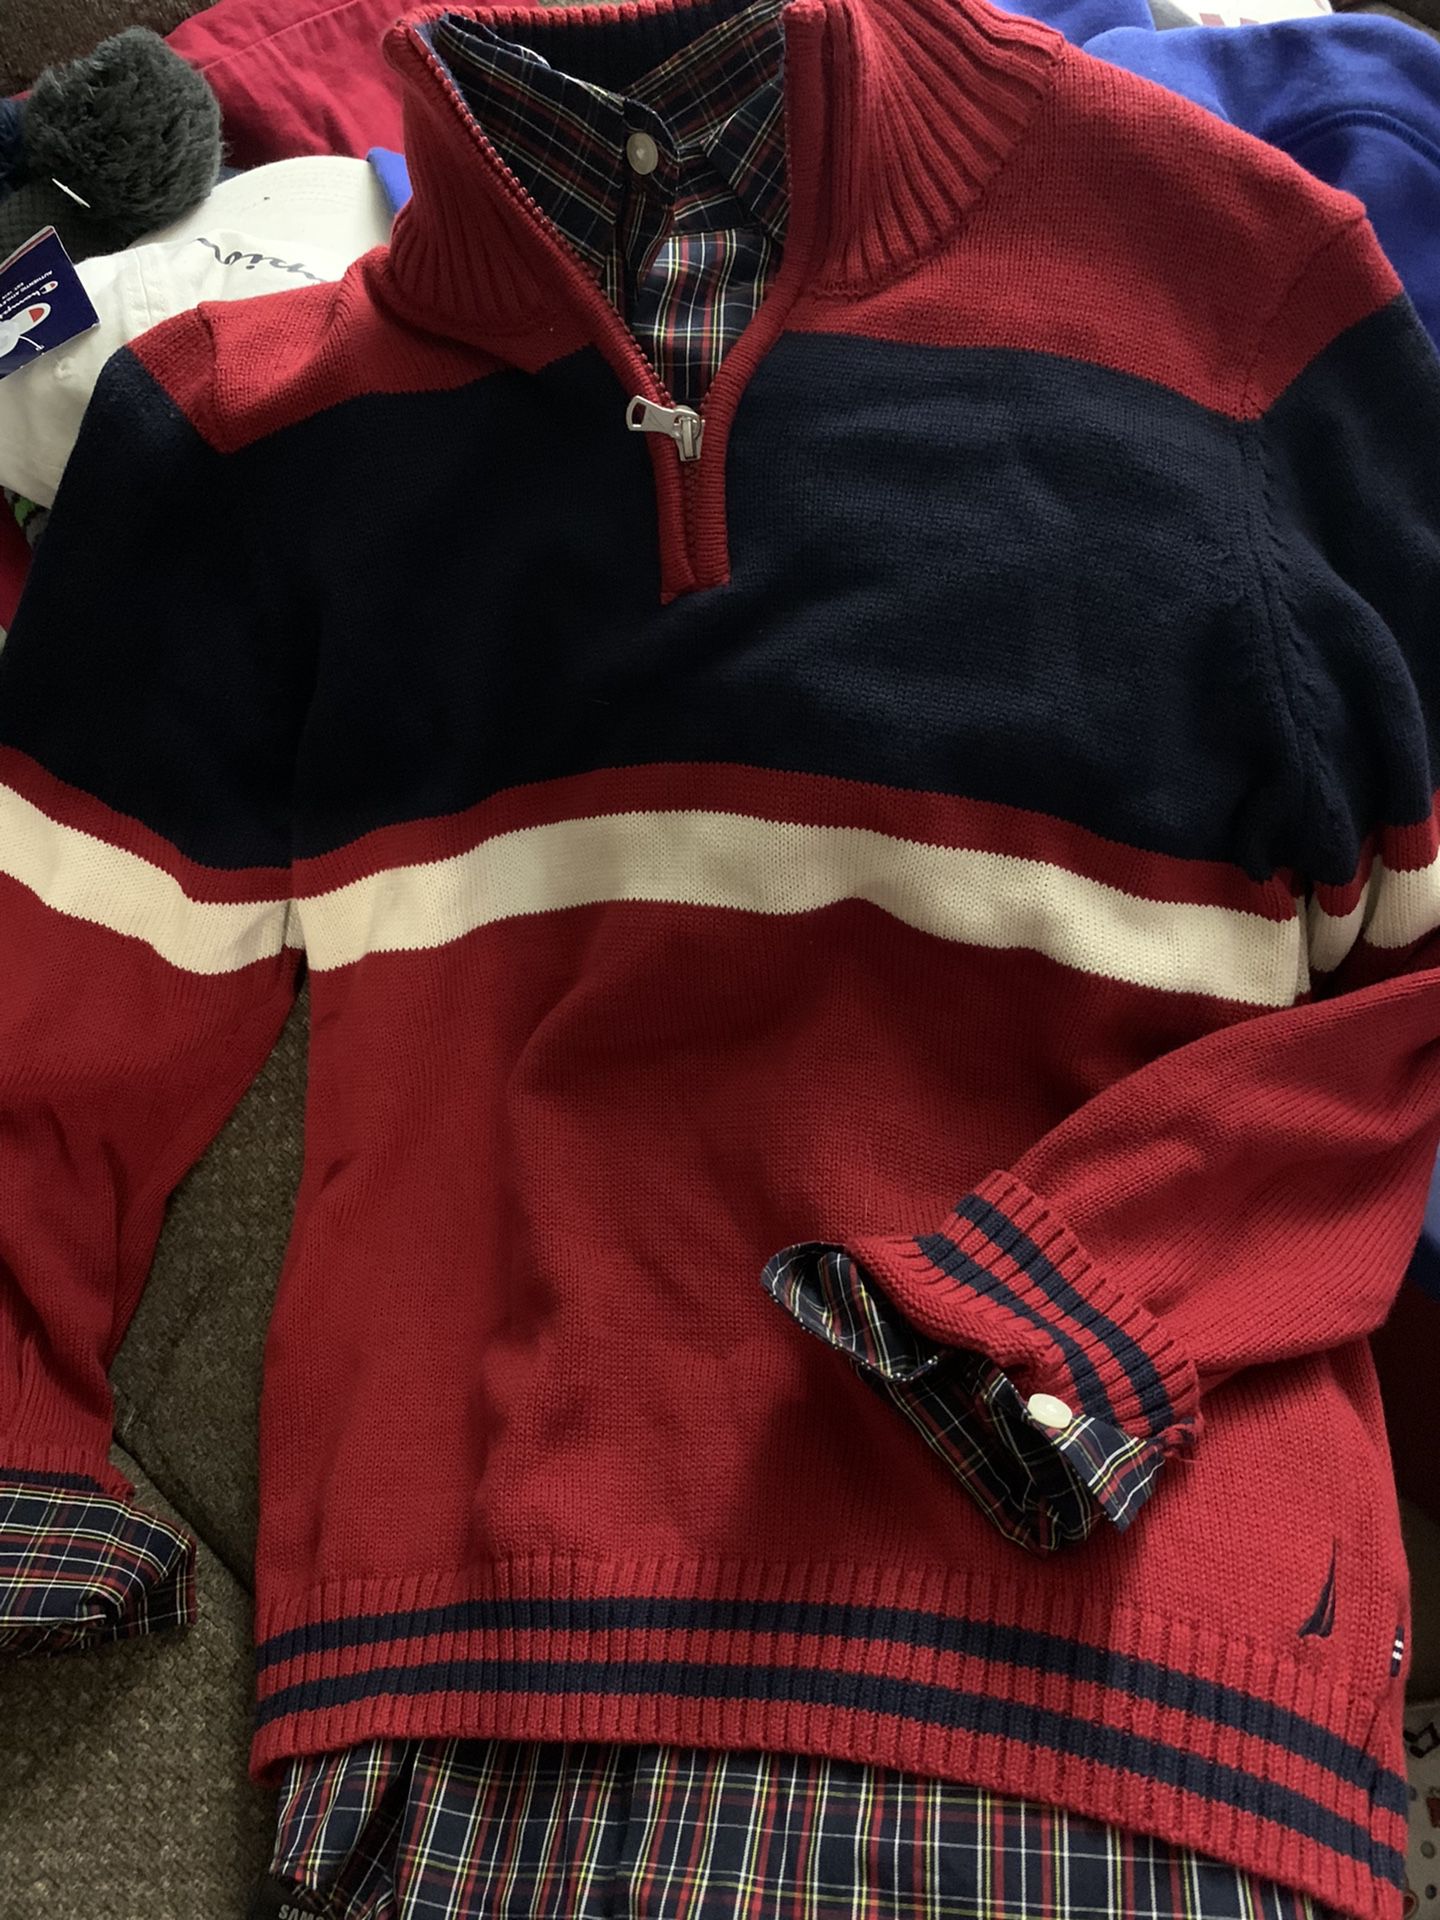 New Boys Size L 14-16 Nautica Plaid Button up shirt and Pull Over Sweater